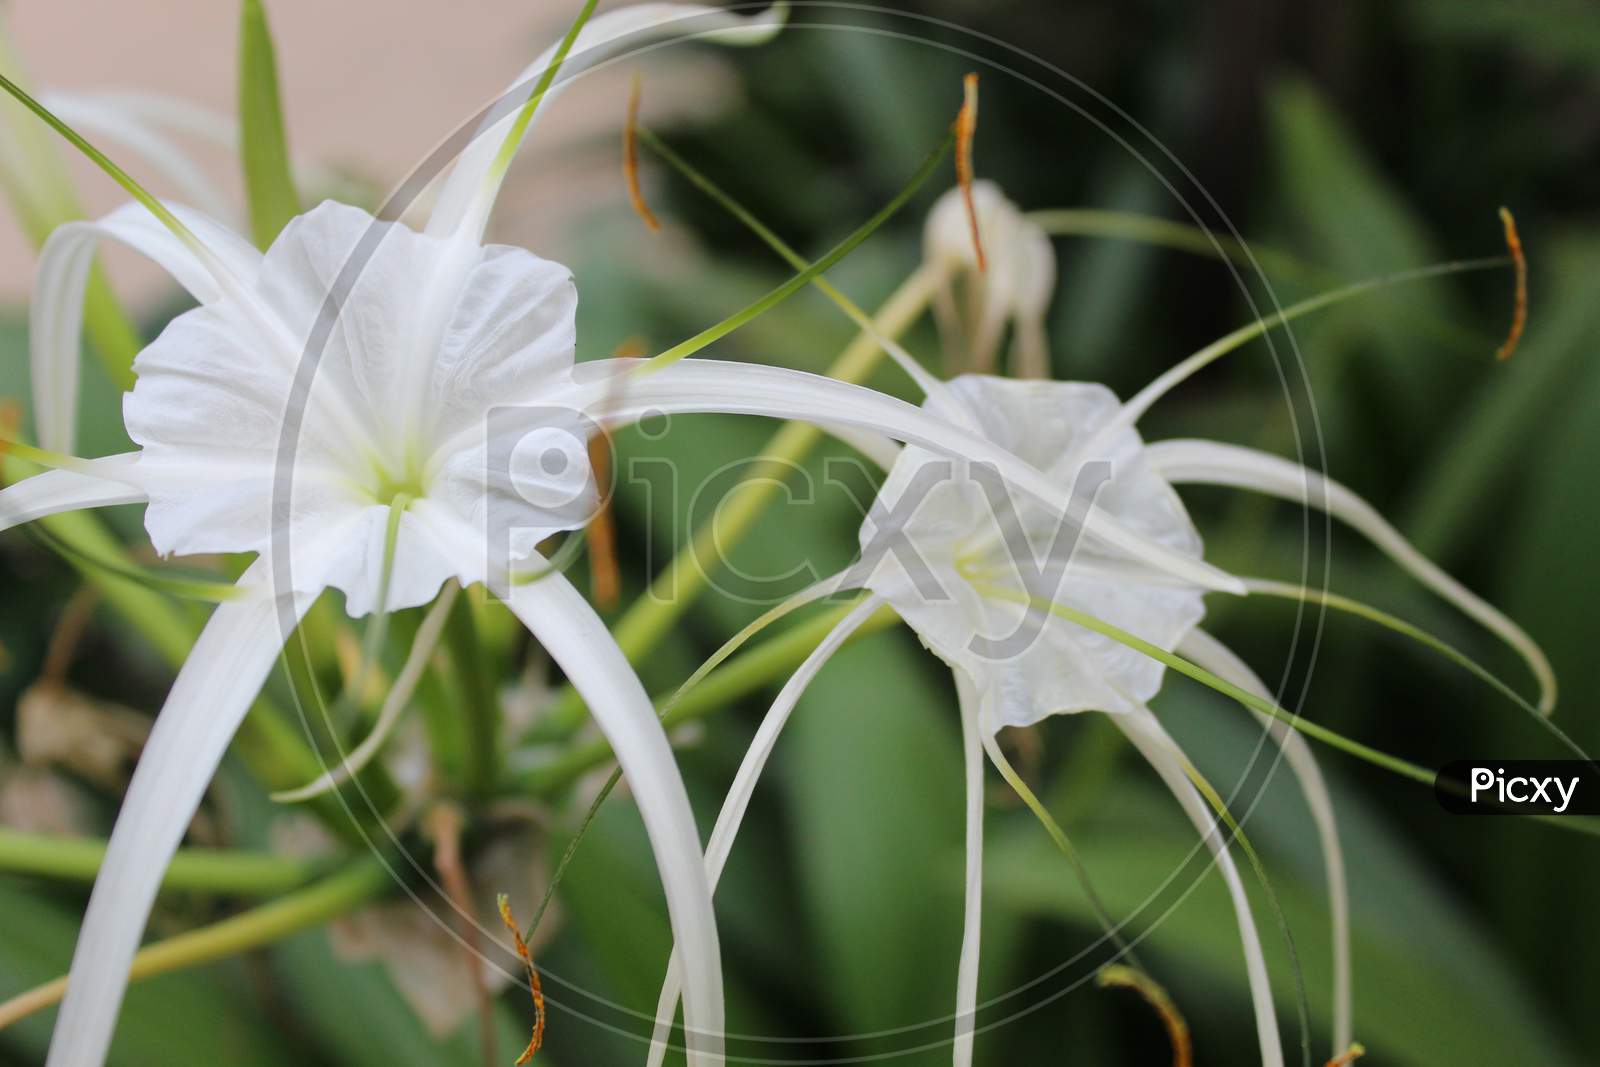 Hymenocallis speciosa, the green-tinge spider lily display with green nature